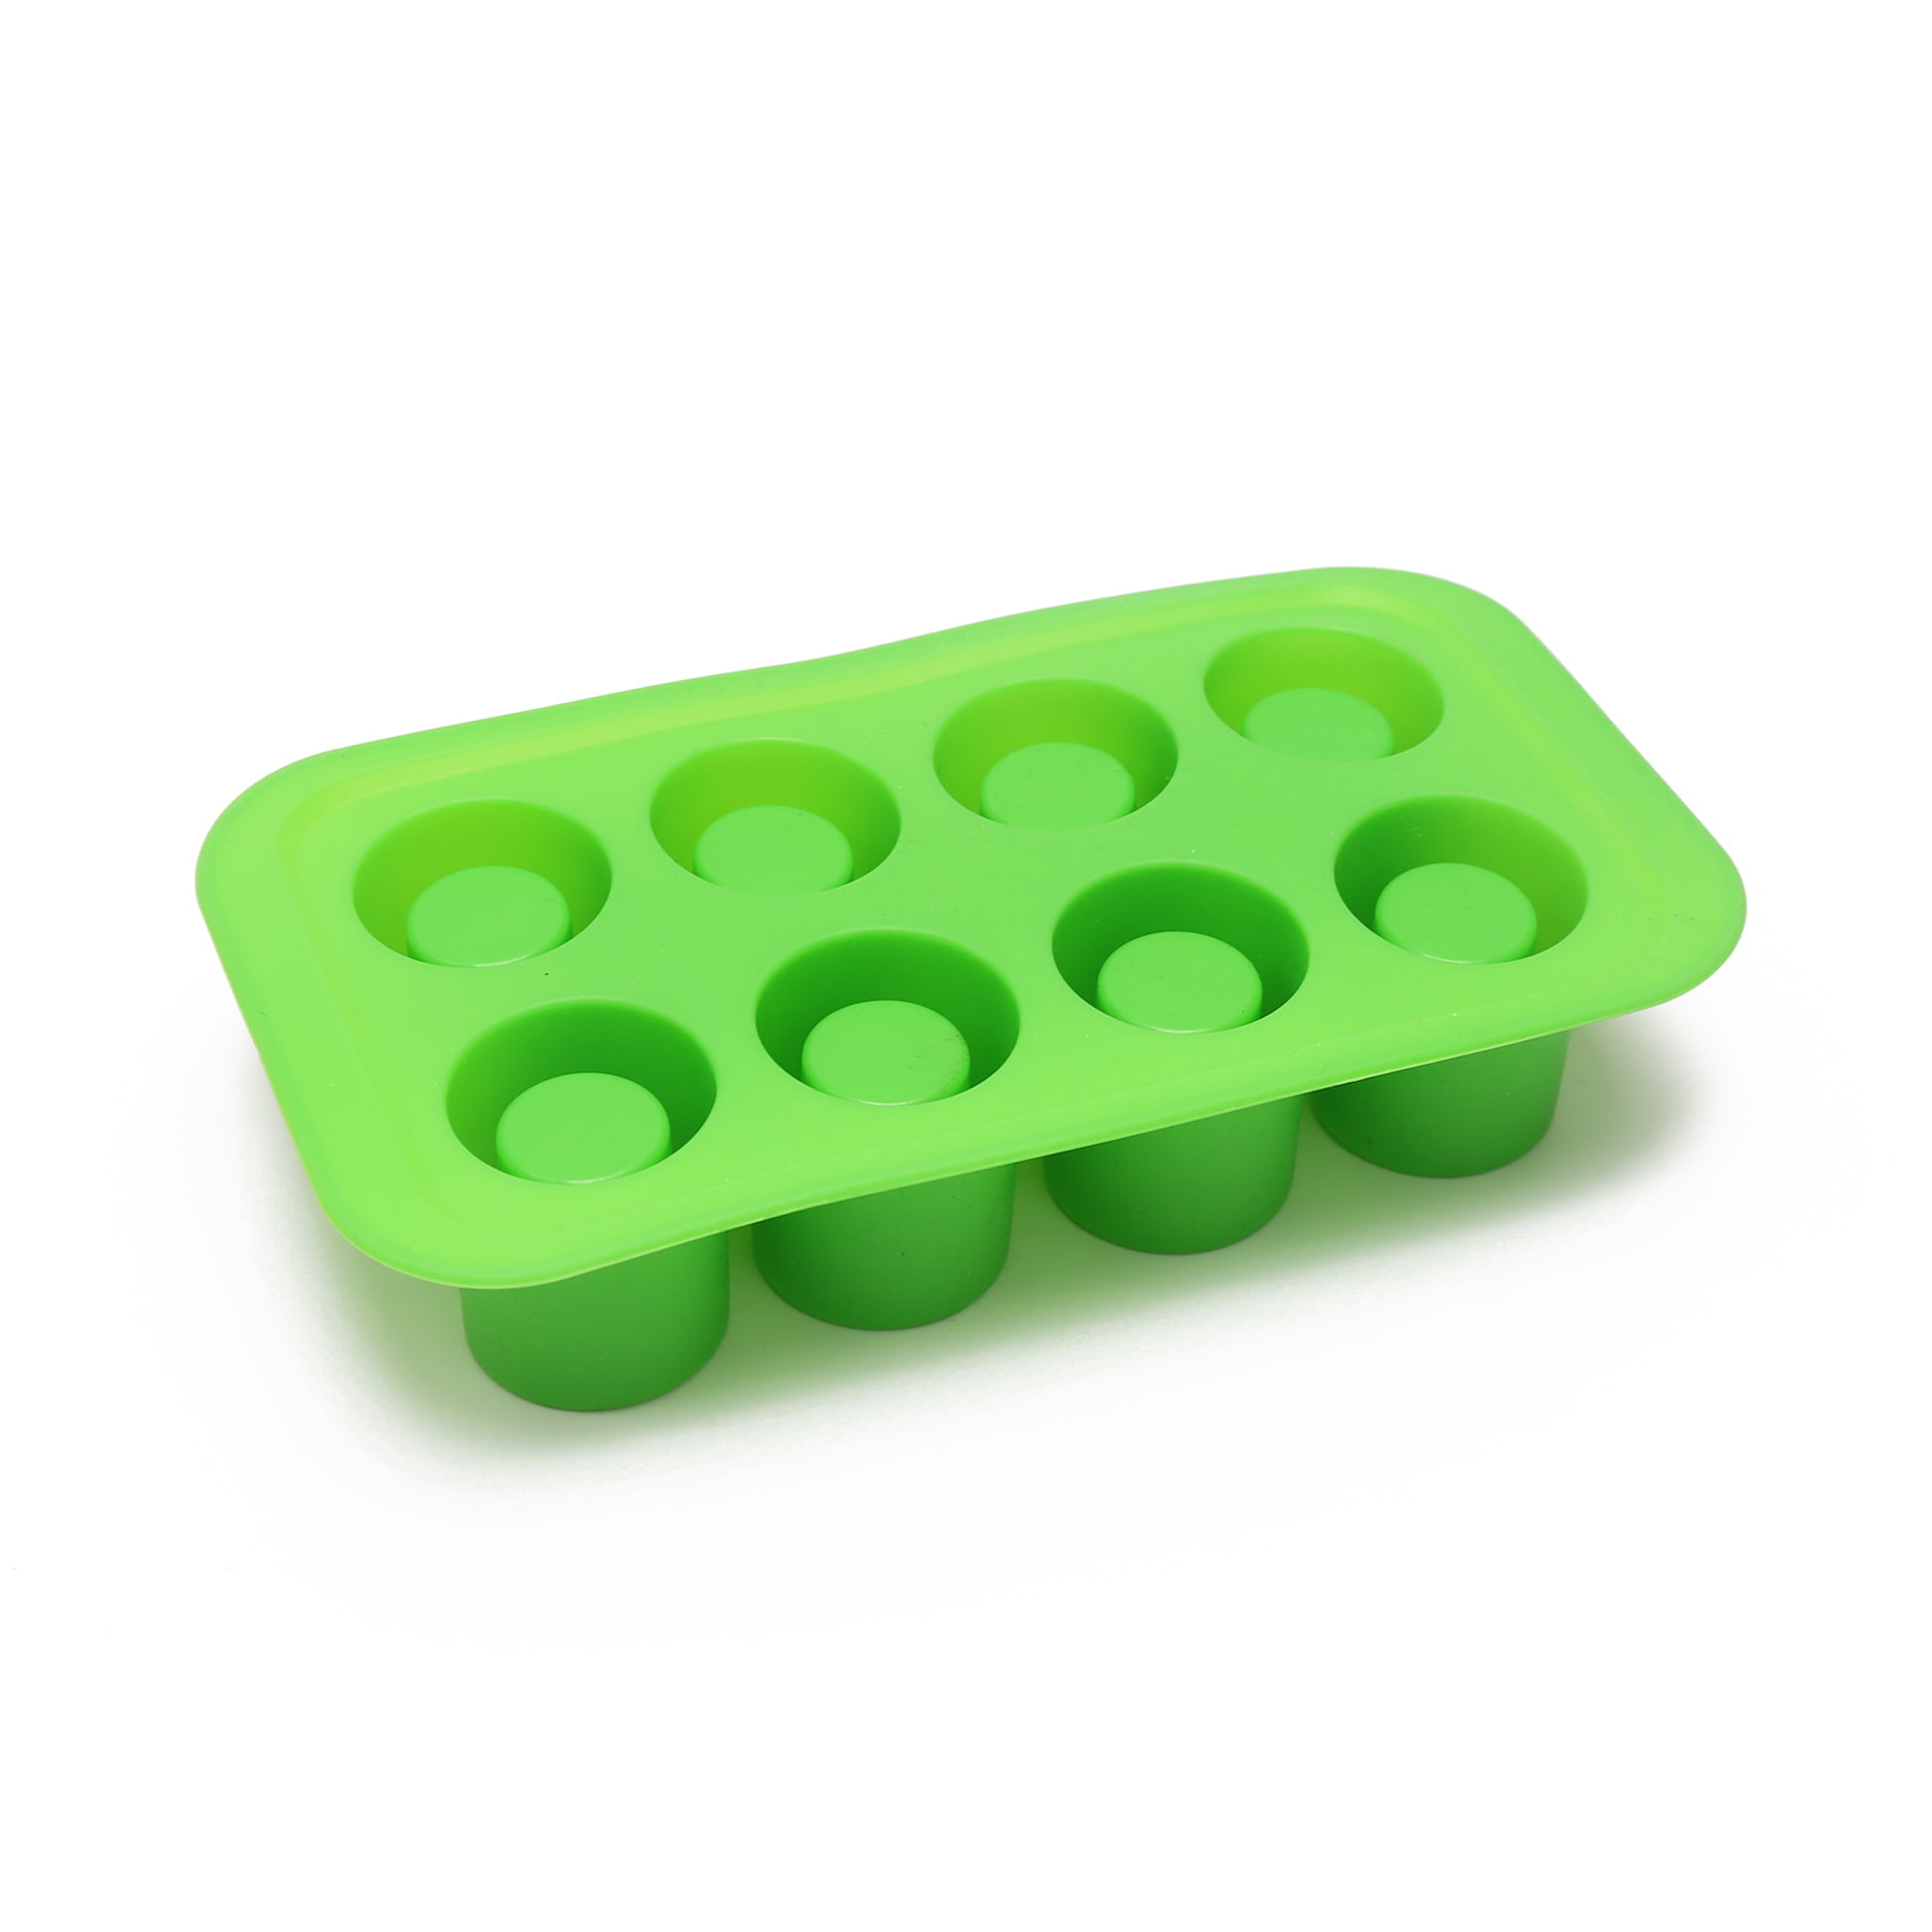 Way To Celebrate 8 Cavities Silicone Mold,Green,Baking,Non-stick,1 Piece